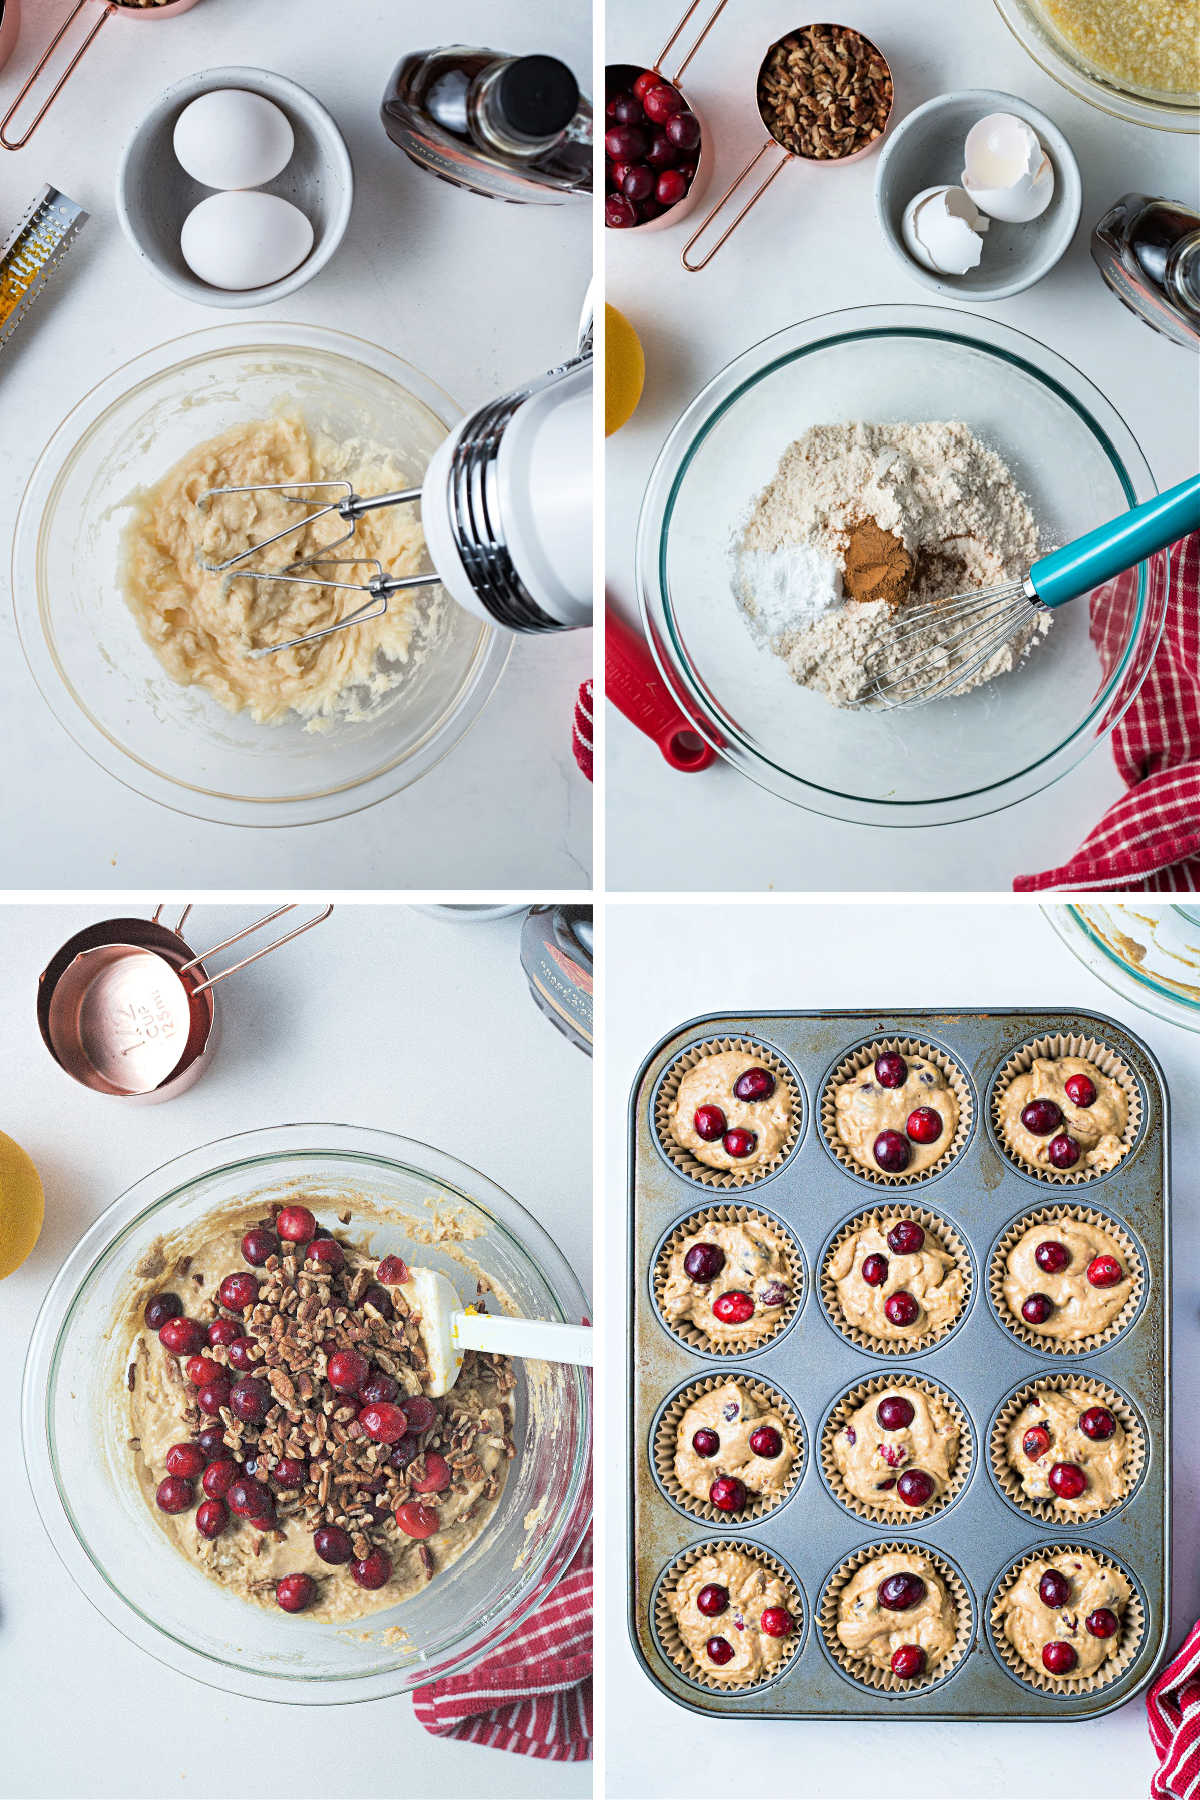 process steps for making orange cranberry muffins: cream coconut oil and maple syrup together; whisk together dry ingredients; fold in cranberries and nuts; portion into muffin cups.